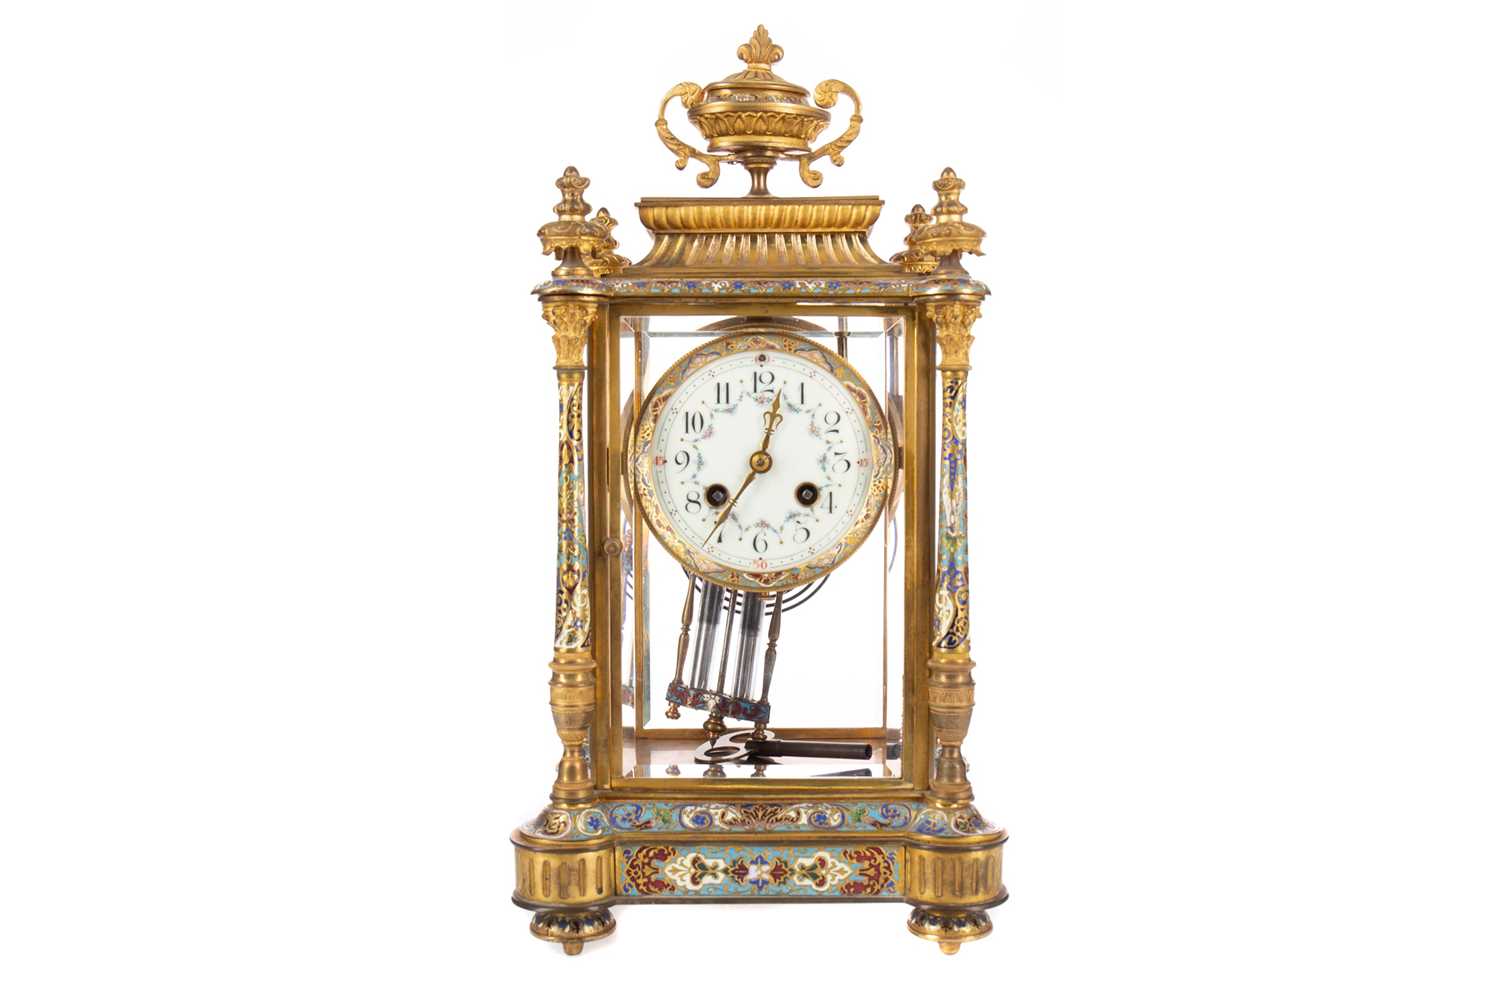 Lot 1192 - A LATE 19TH CENTURY FRENCH GILTMETAL AND CHAMPLEVE ENAMEL MANTEL CLOCK